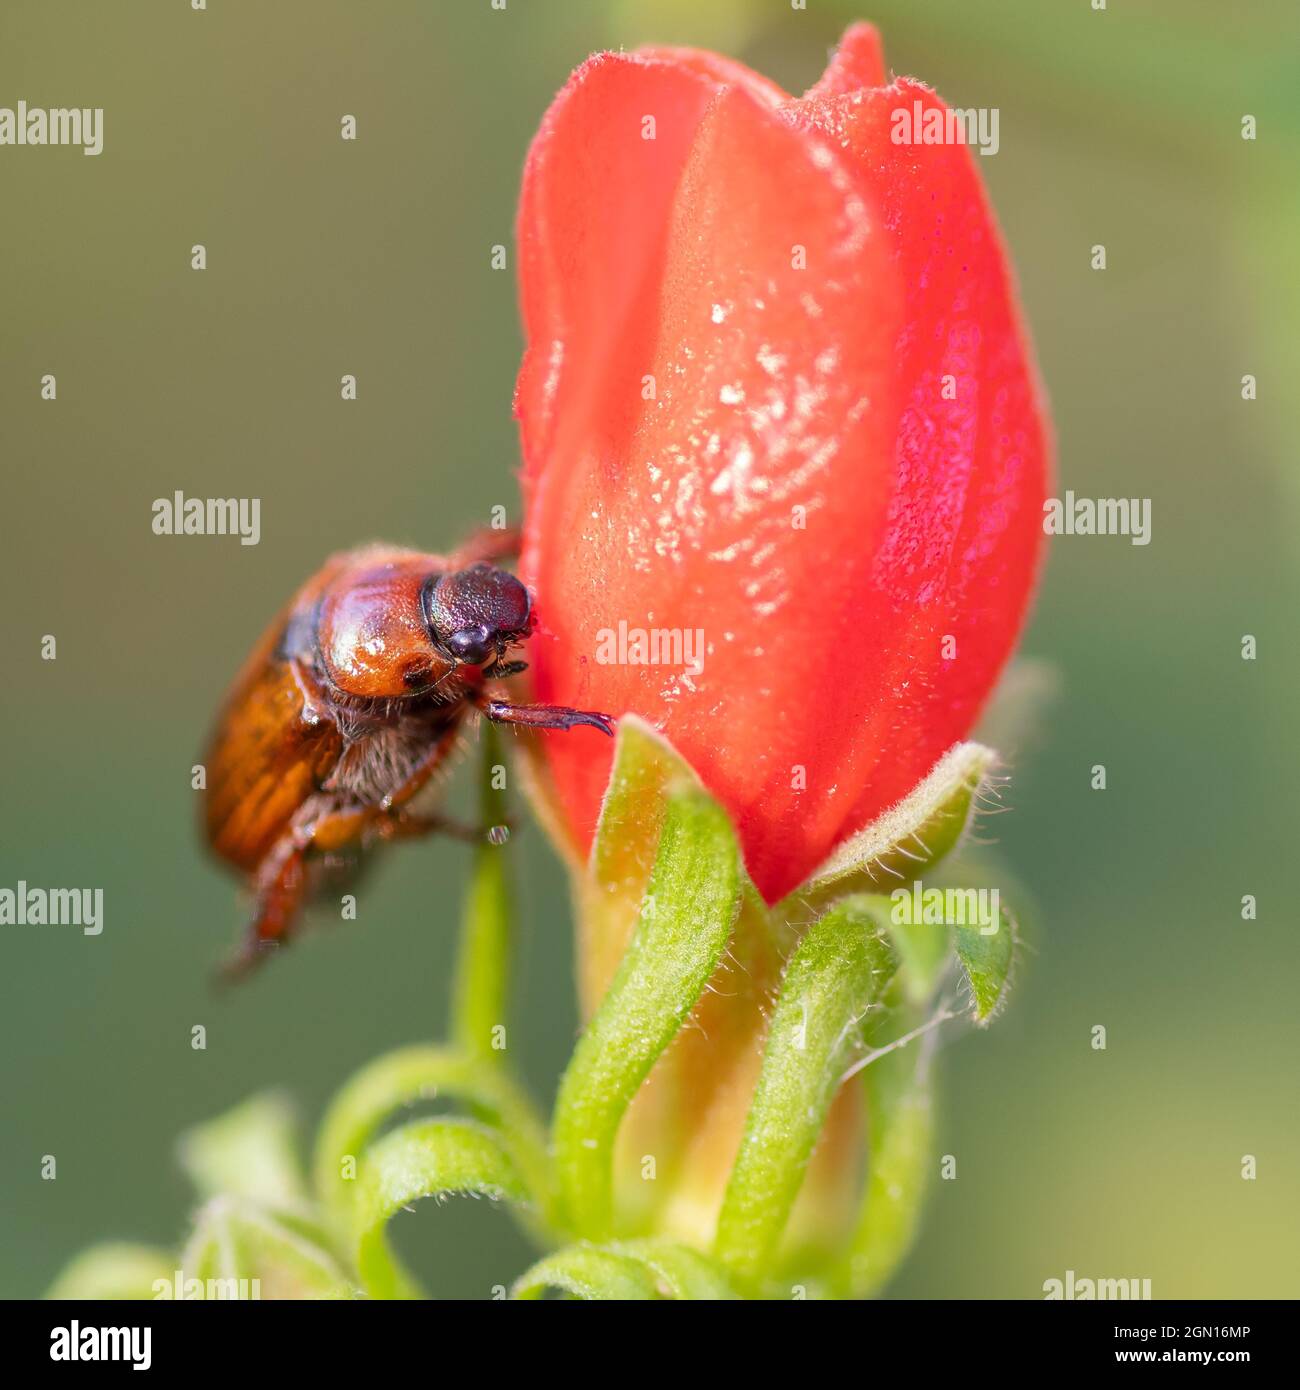 A june bug chewing through the flower of a turk's cap plant. Stock Photo